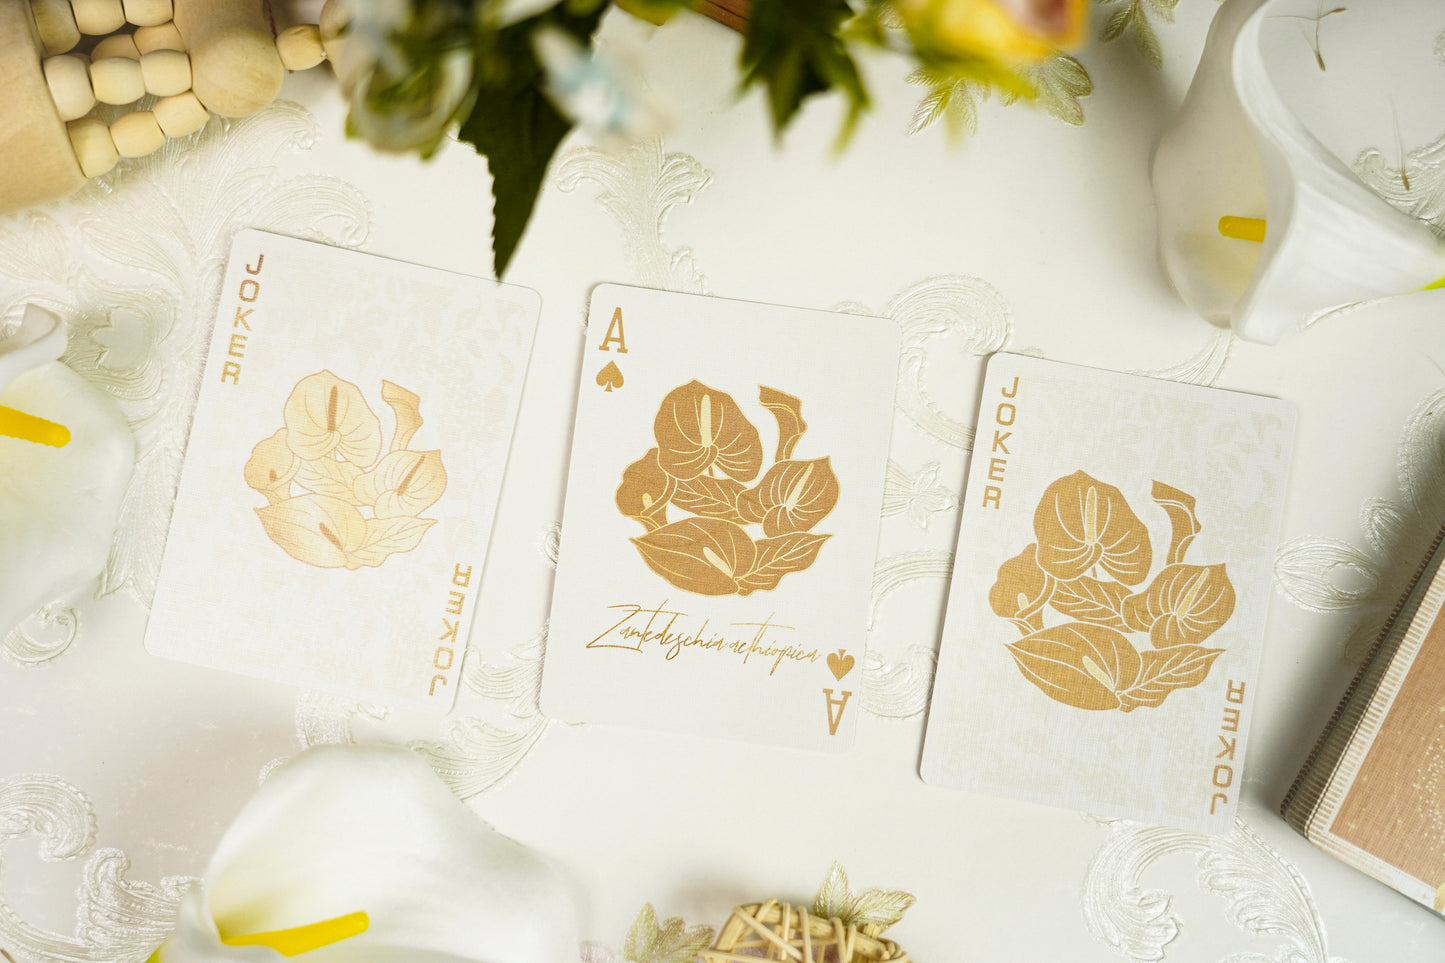 The language of flowers Playing Cards by NANA Studio